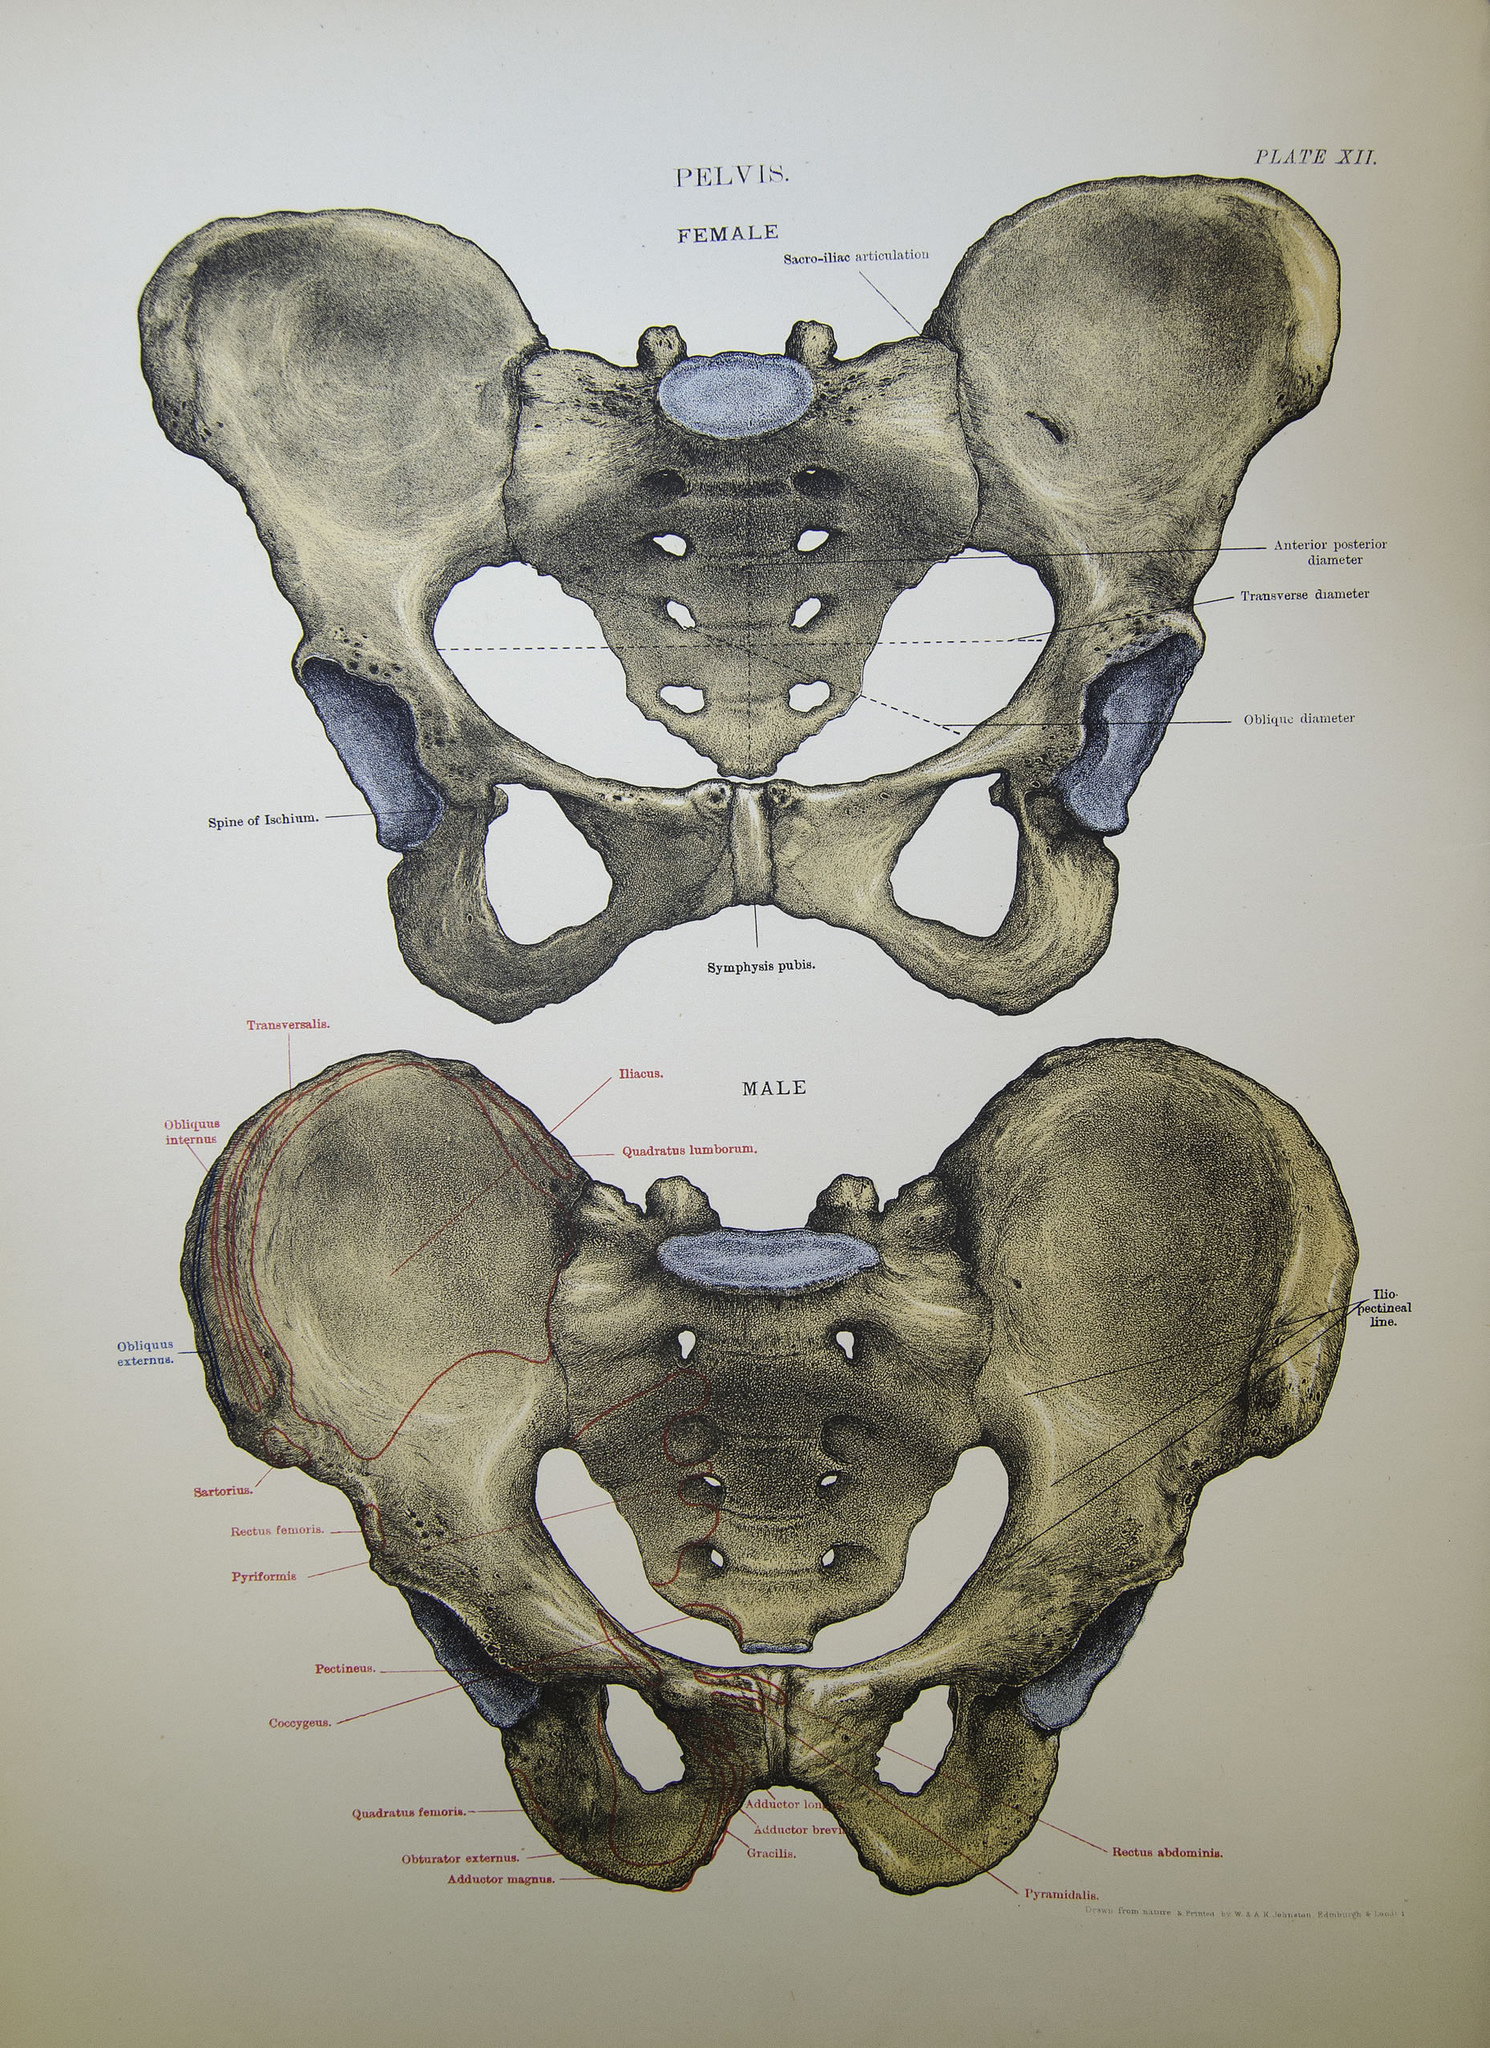 Male and Female Pelvis (CC BY-SA 2.0) from https://www.flickr.com/photos/liverpoolhls/